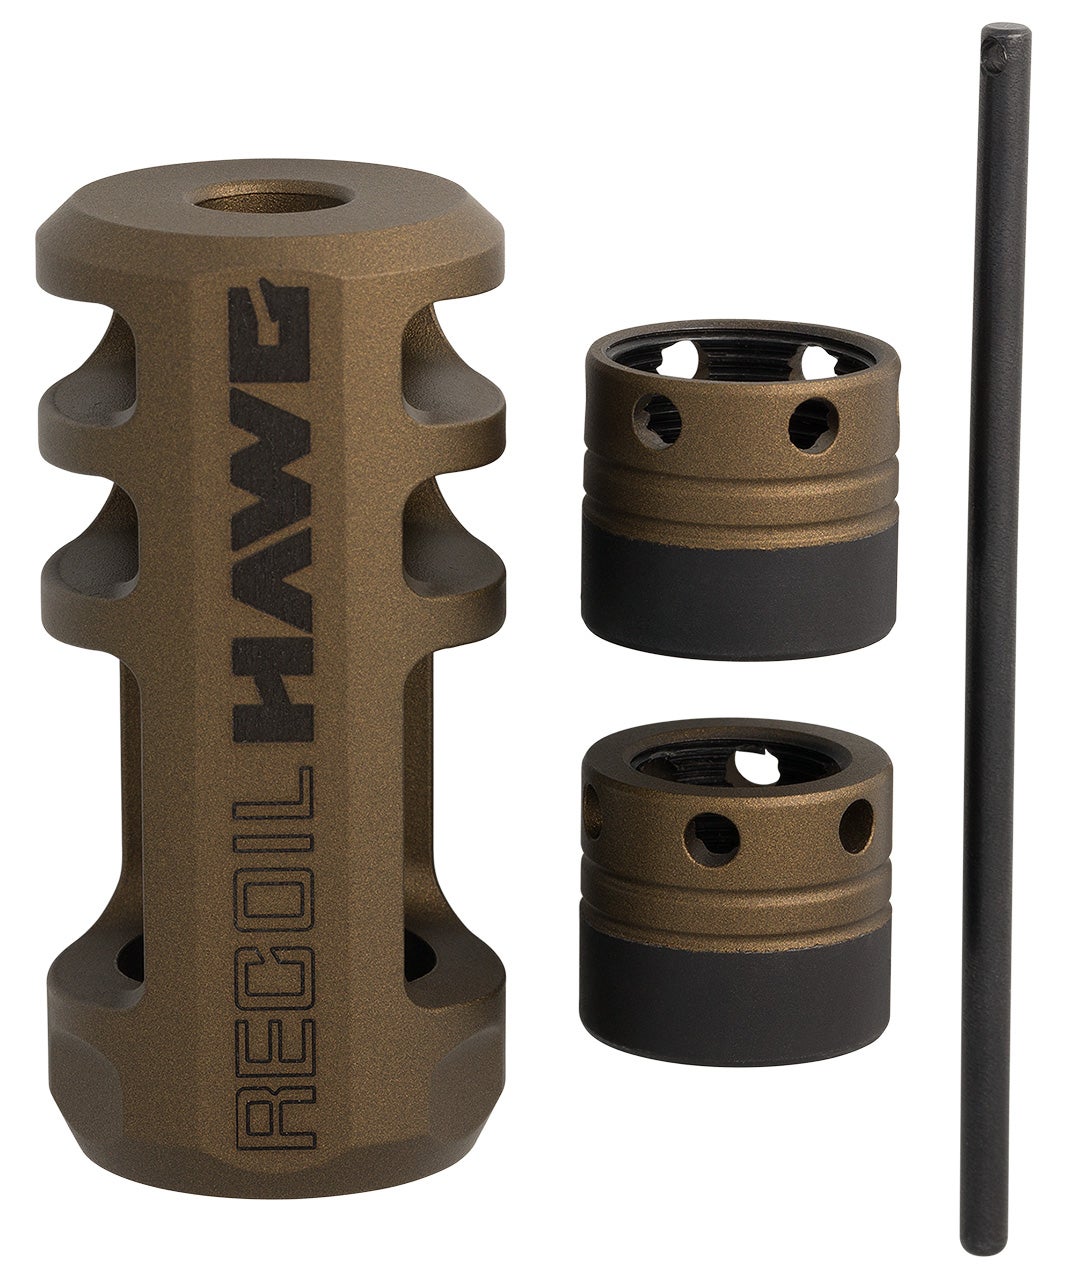 https://www.browning.com/content/dam/browning/product/shooting-accessories/miscellaneous/recoil-hawg/recoil-hawg-muzzle-brake-bronze-all-parts.jpg